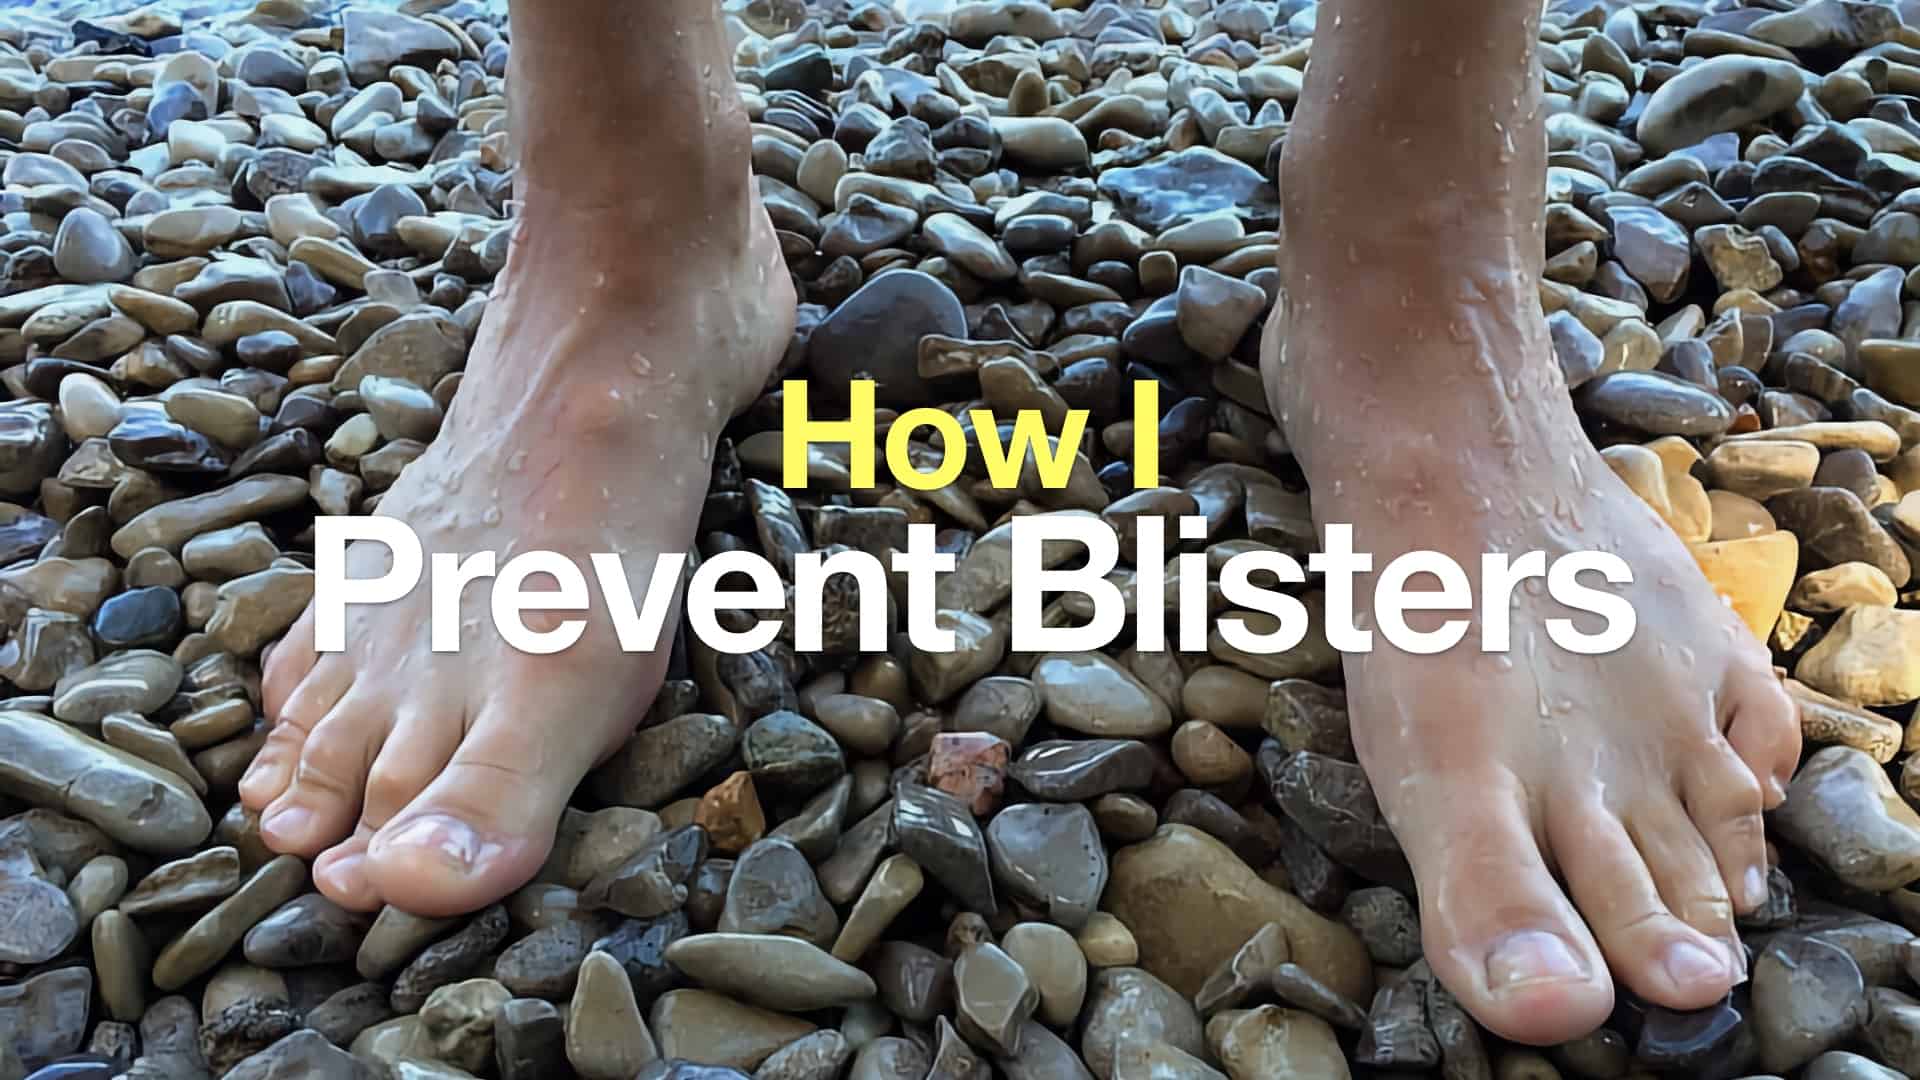 Blisters - Our simple guide to treating and preventing them